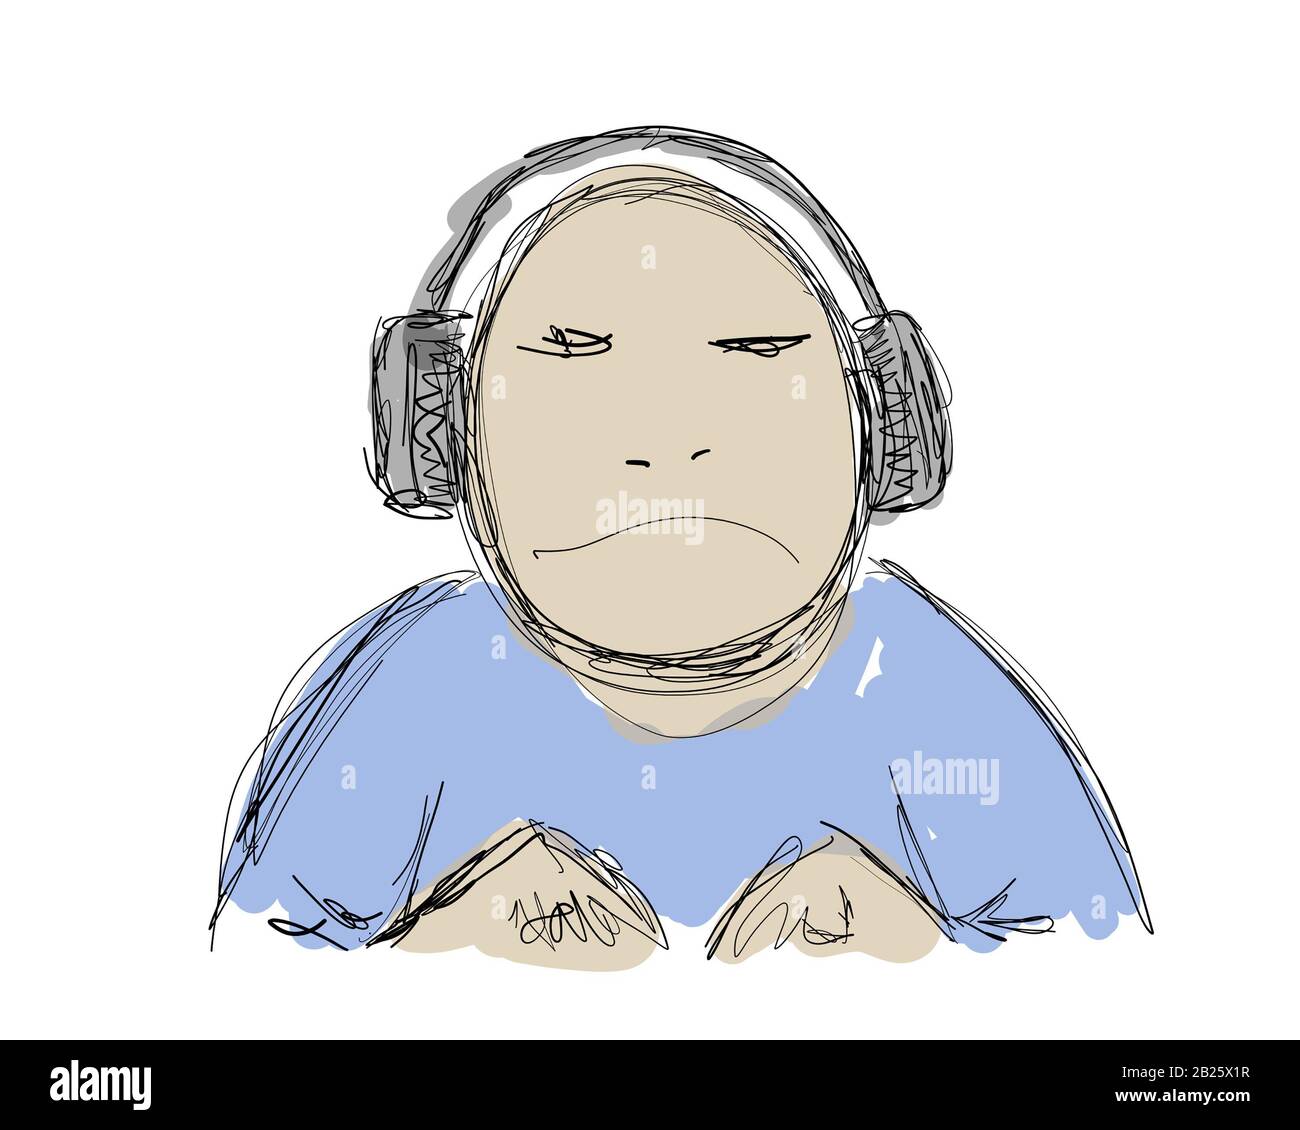 Digitla sketch of middle aged grumpy man listening to music on headphones Stock Photo